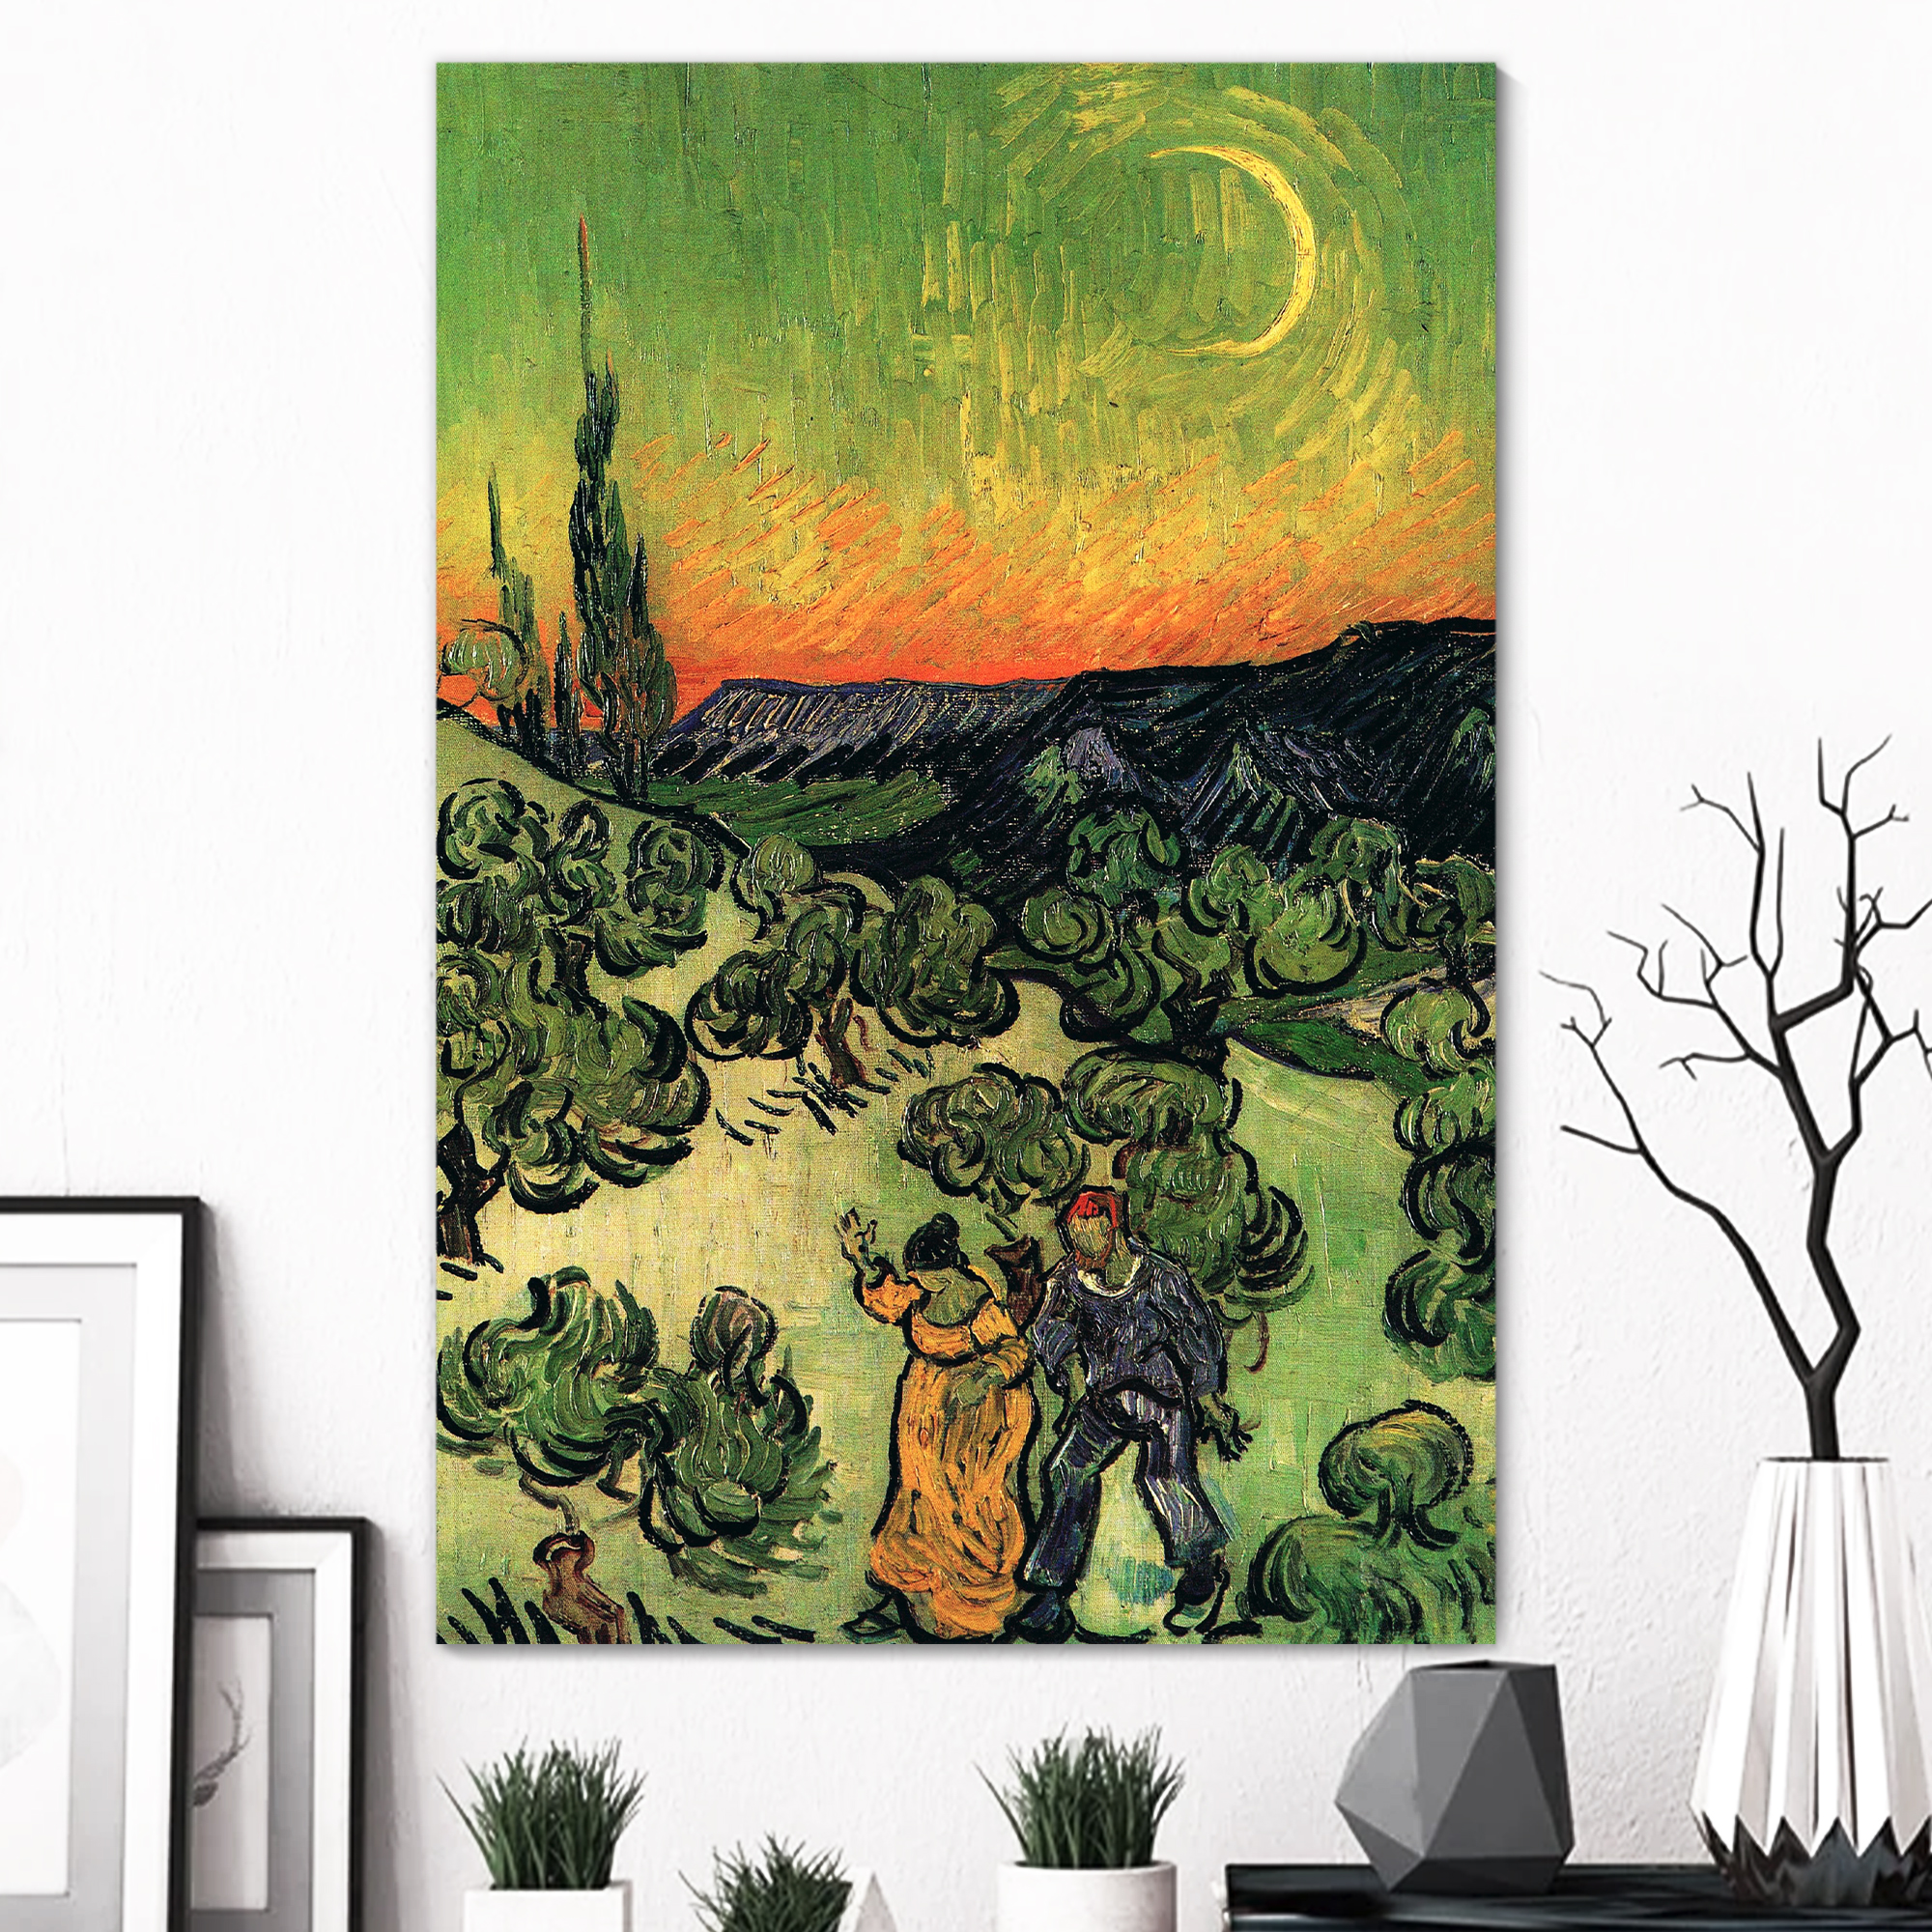 Landscape with Couple Walking and Crescent Moon by Vincent Van Gogh - Canvas Print Wall Art Famous Painting Reproduction - 12